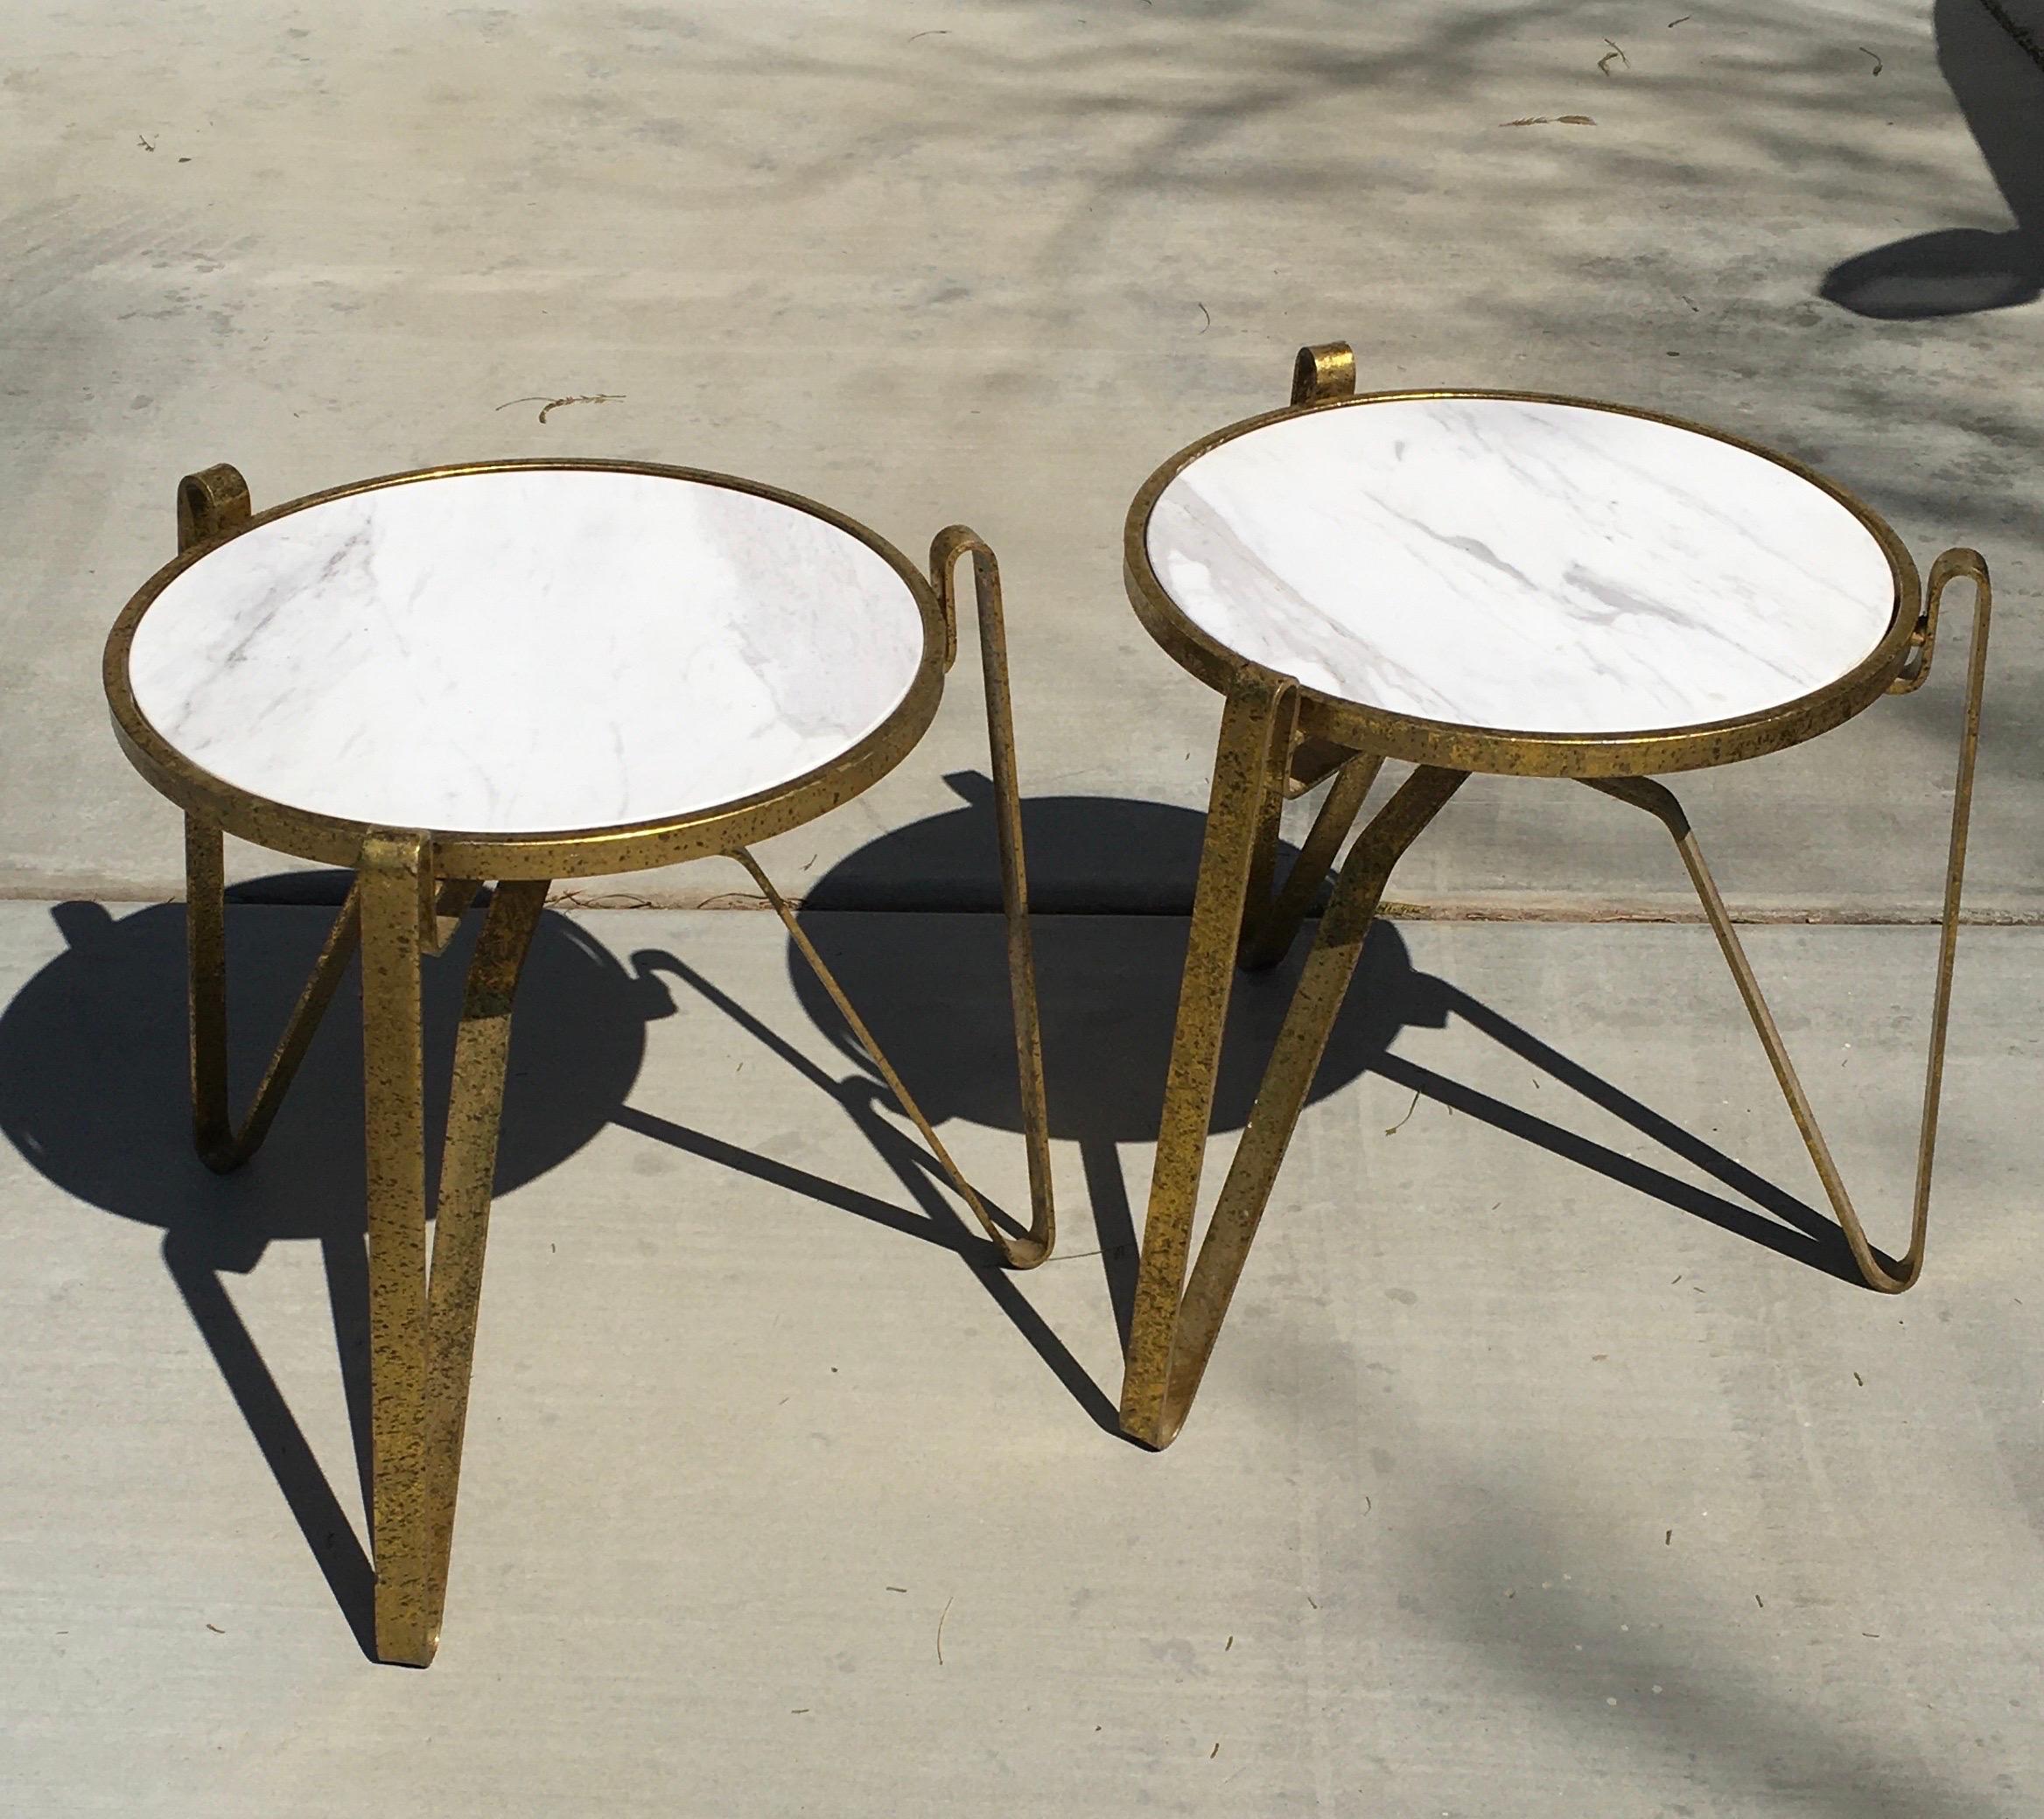 This pair of tables are incredibly chic and look like the Italian modernist style of Geo Ponti from the 1960s. These have been made approximately 10 years ago. The tables as perfect for use as Coffee table used close together or separately on the